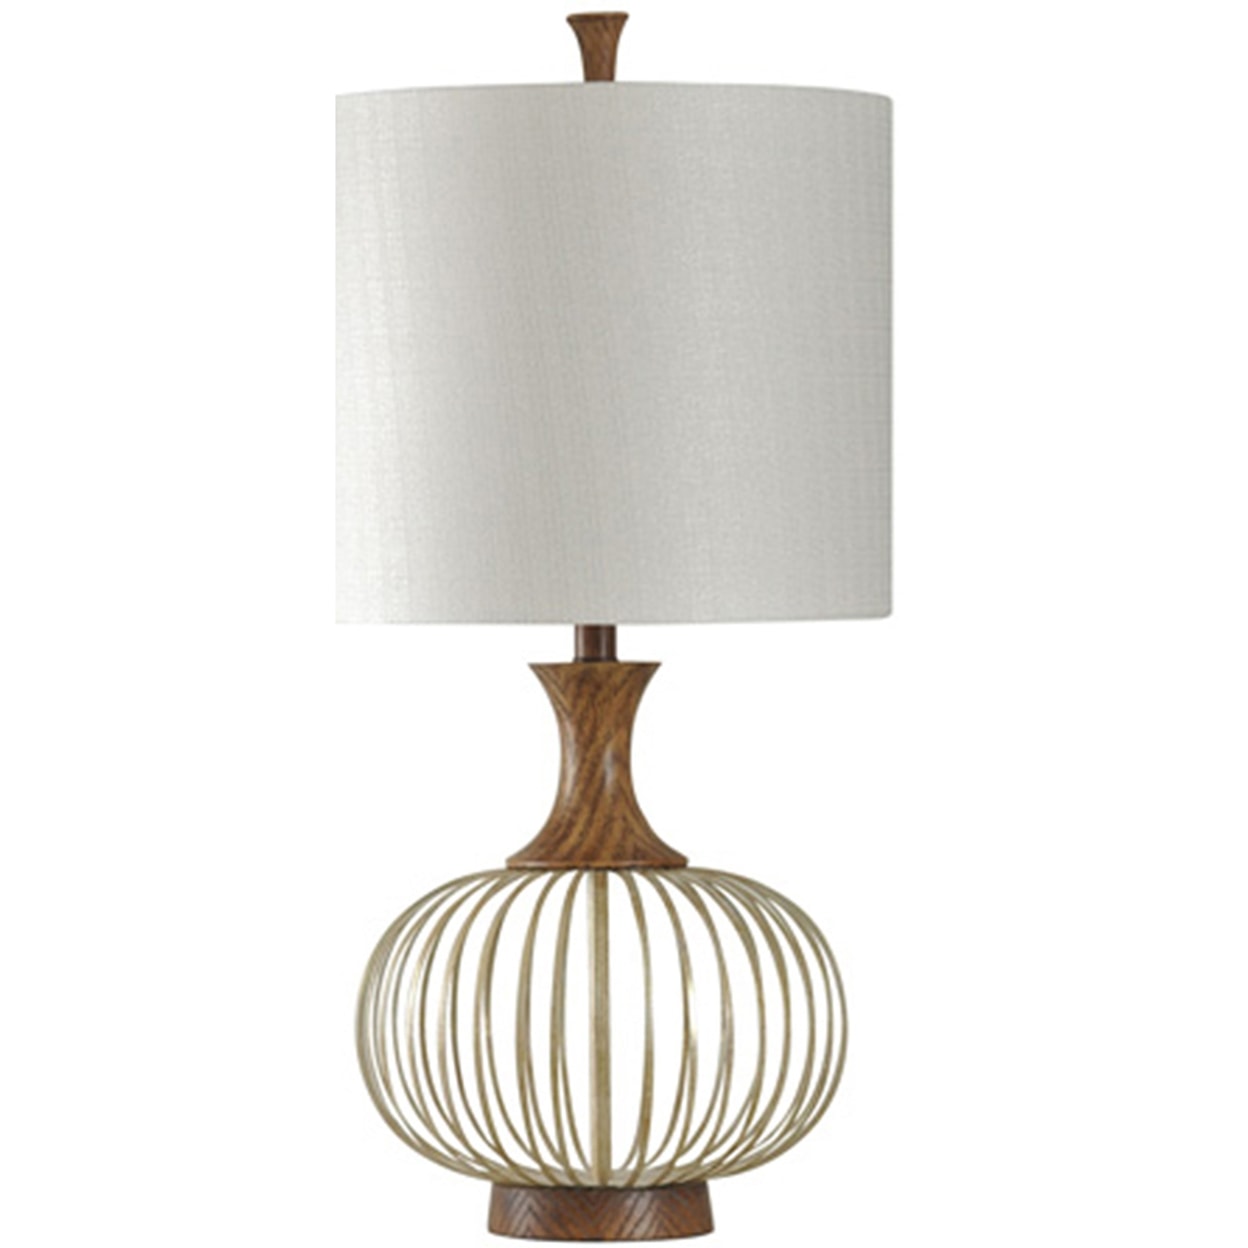 StyleCraft Lamps Brass And Wood Barrel Table Lamp